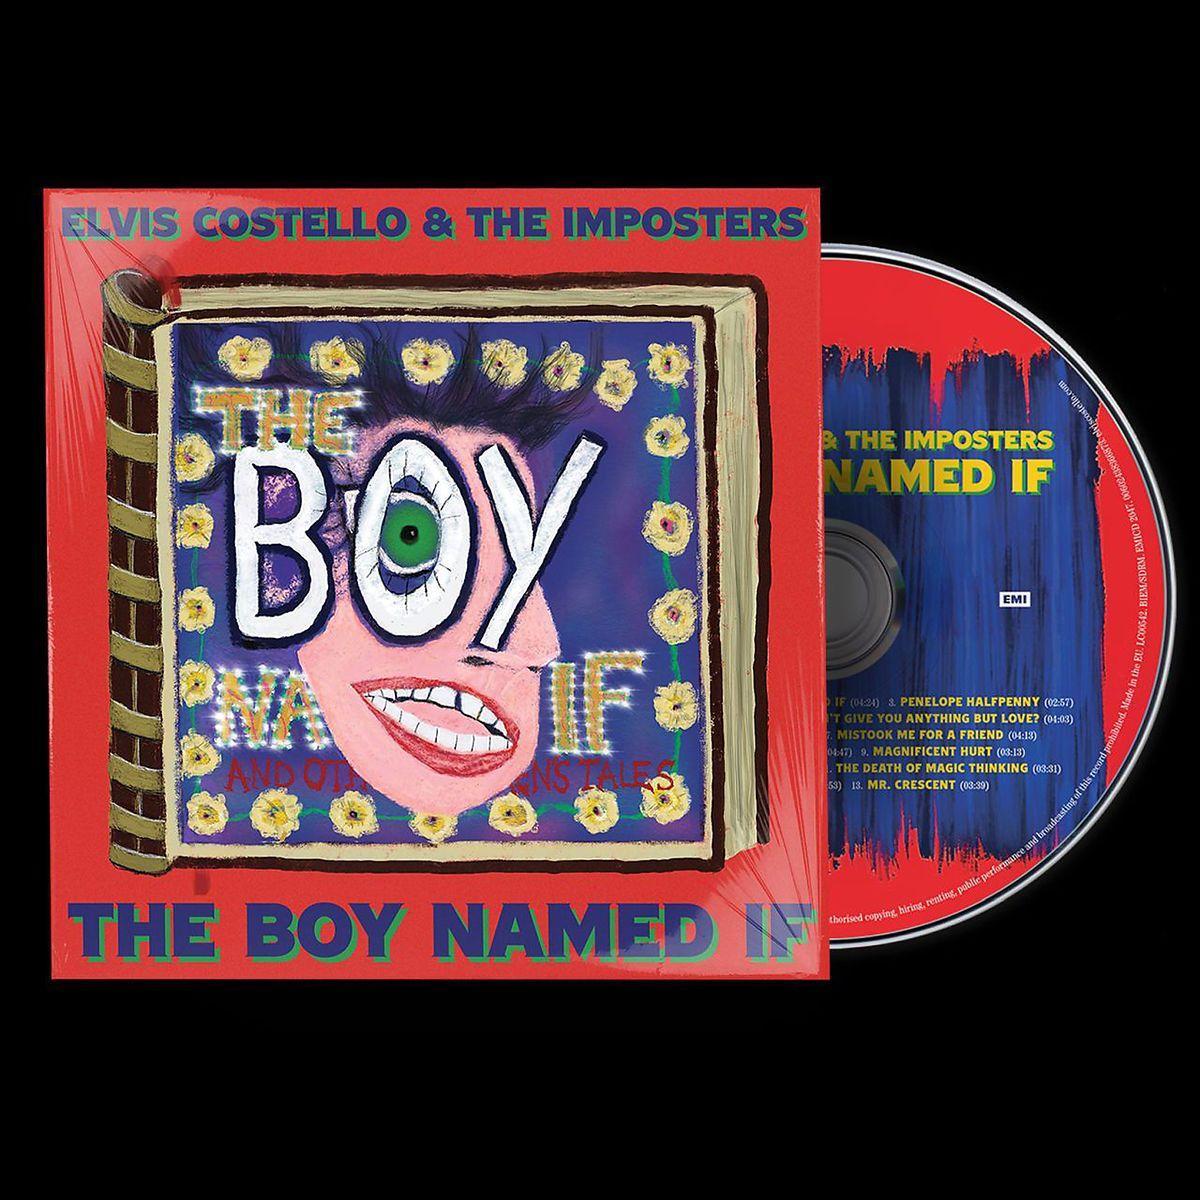 Аудио Elvis Costello & The Imposters: The Boy Named If 